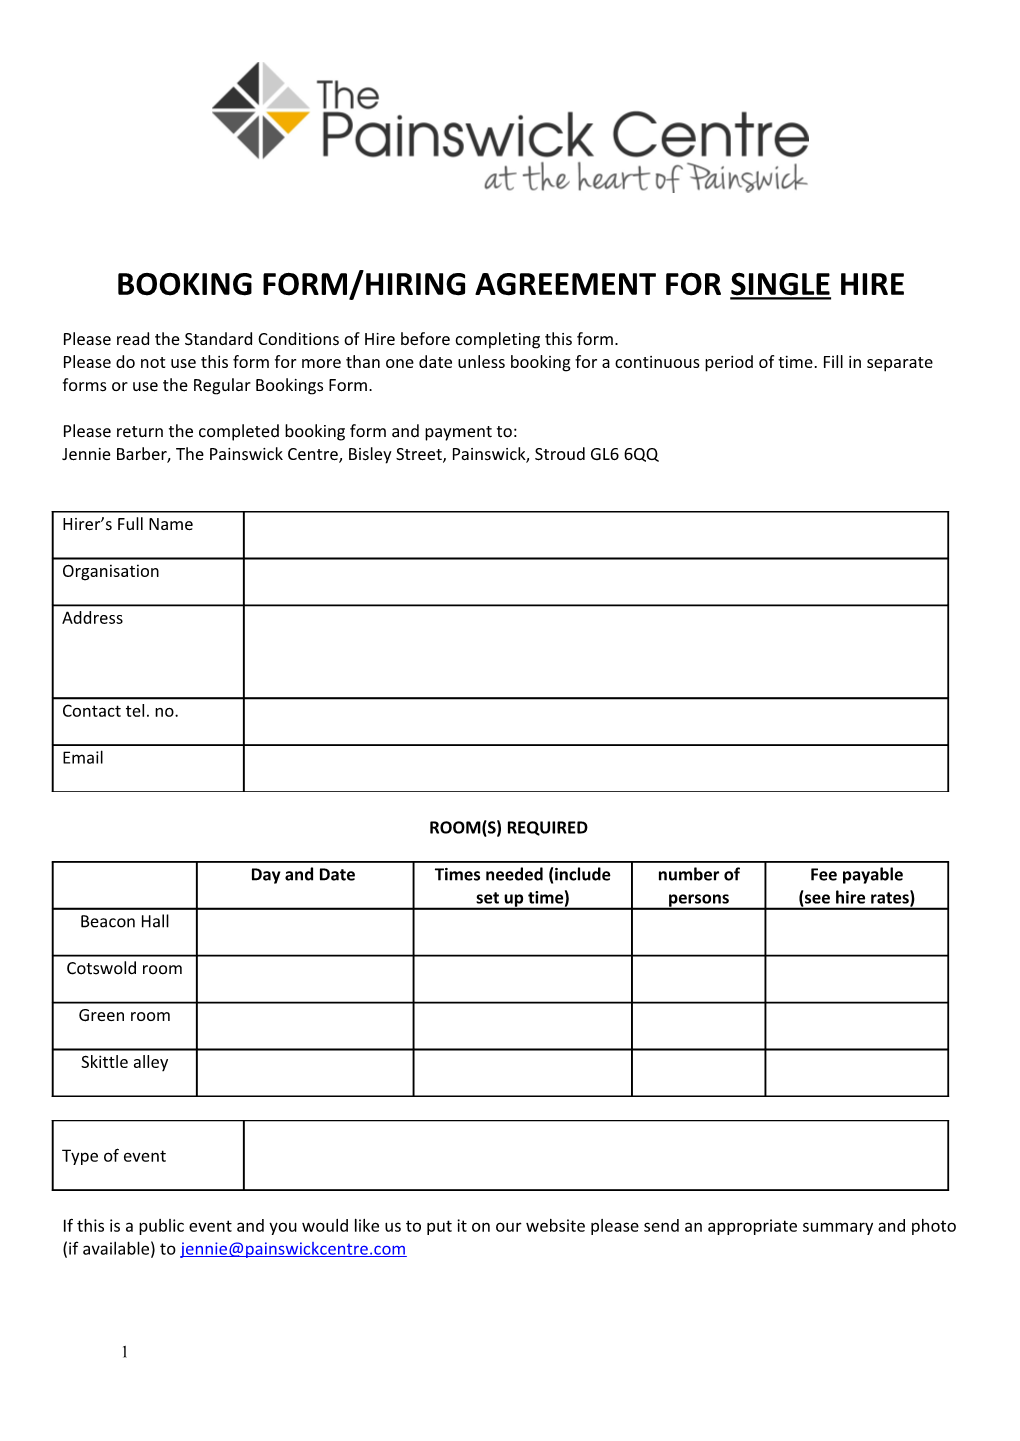 Booking Form/Hiring Agreement for Single Hire